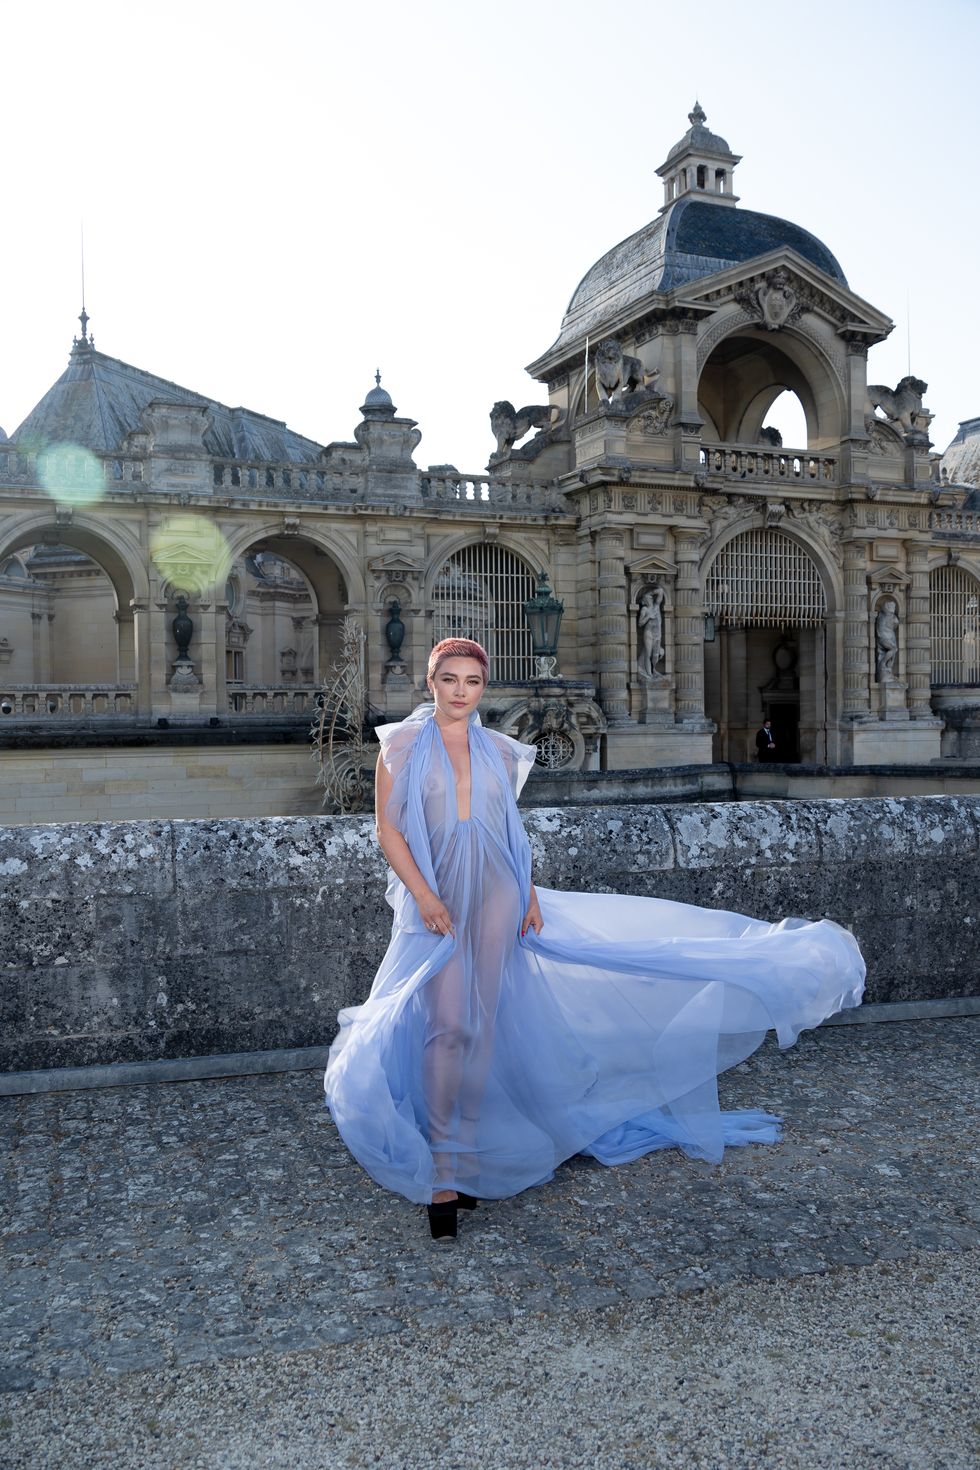 chantilly, france july 05 editorial use only for non editorial use please seek approval from fashion house editors note image contains nudity florence pugh attends the valentino haute couture fallwinter 20232024 show as part of paris fashion week at chateau de chantilly on july 05, 2023 in chantilly, france photo by marc piaseckiwireimage